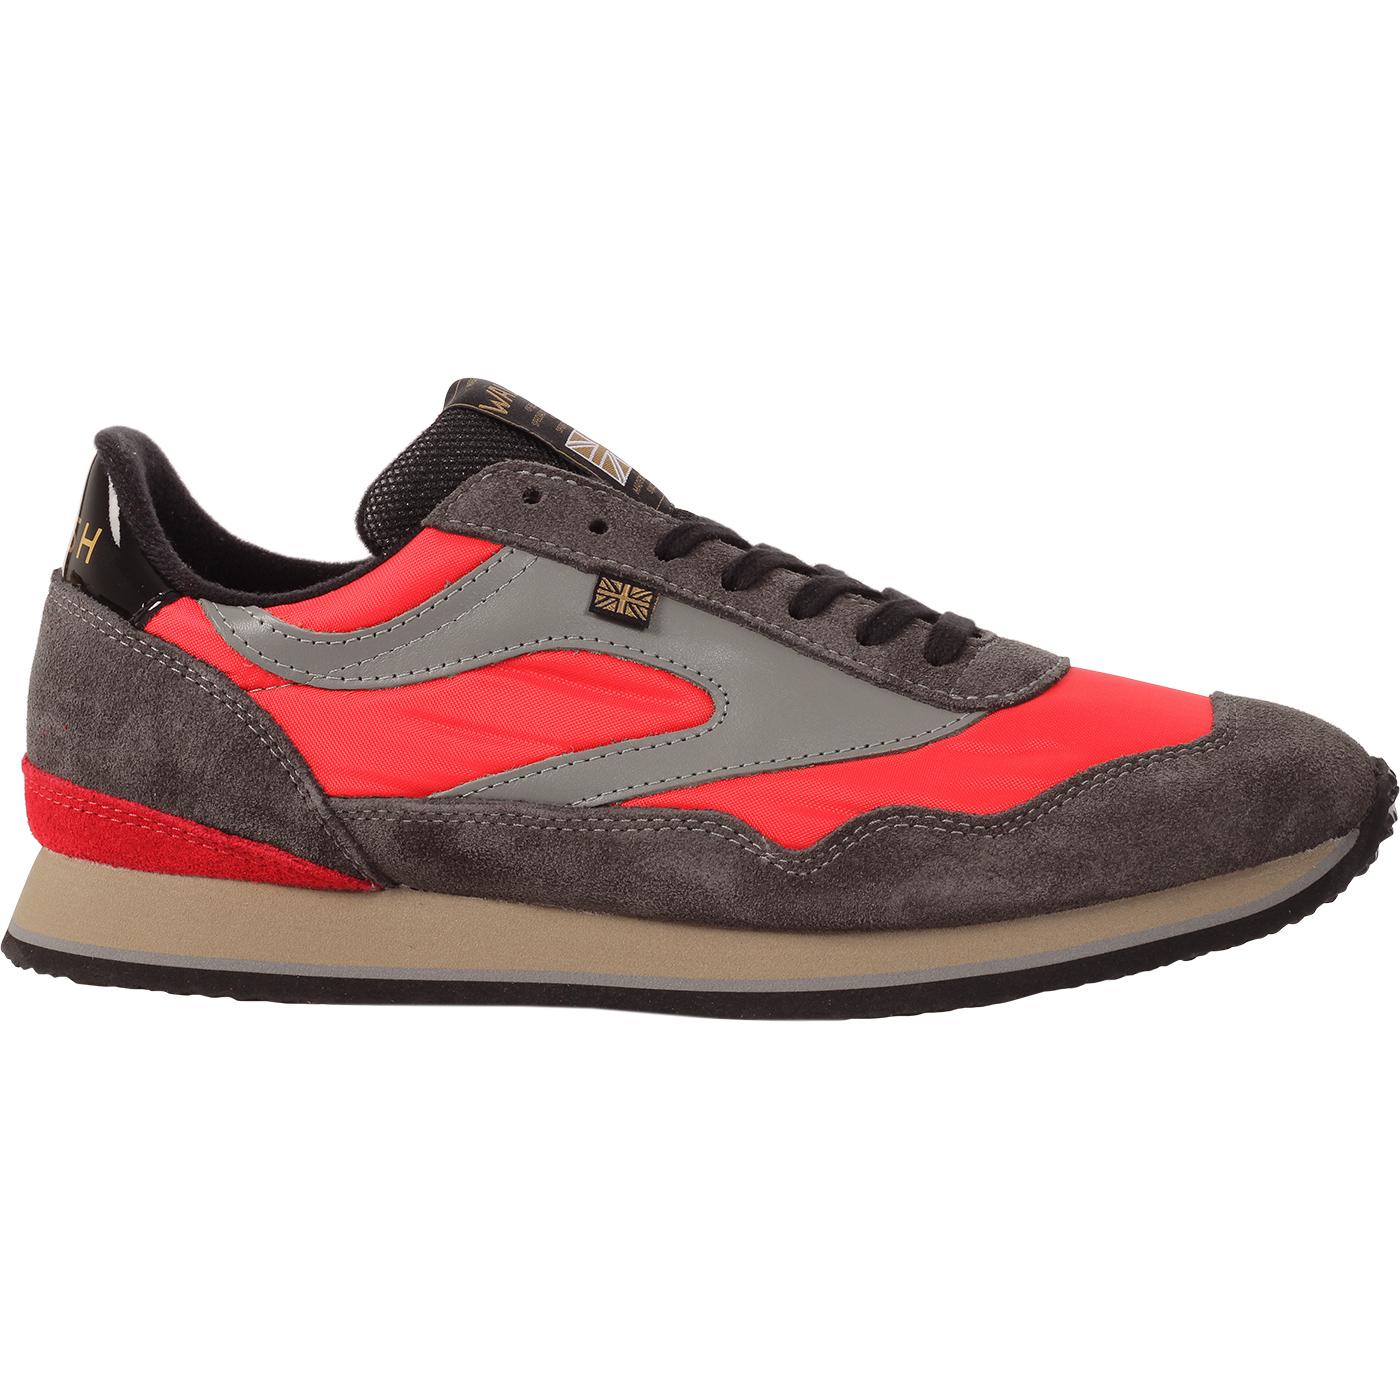 Ensign WALSH Made in England Retro Trainers R/G/B